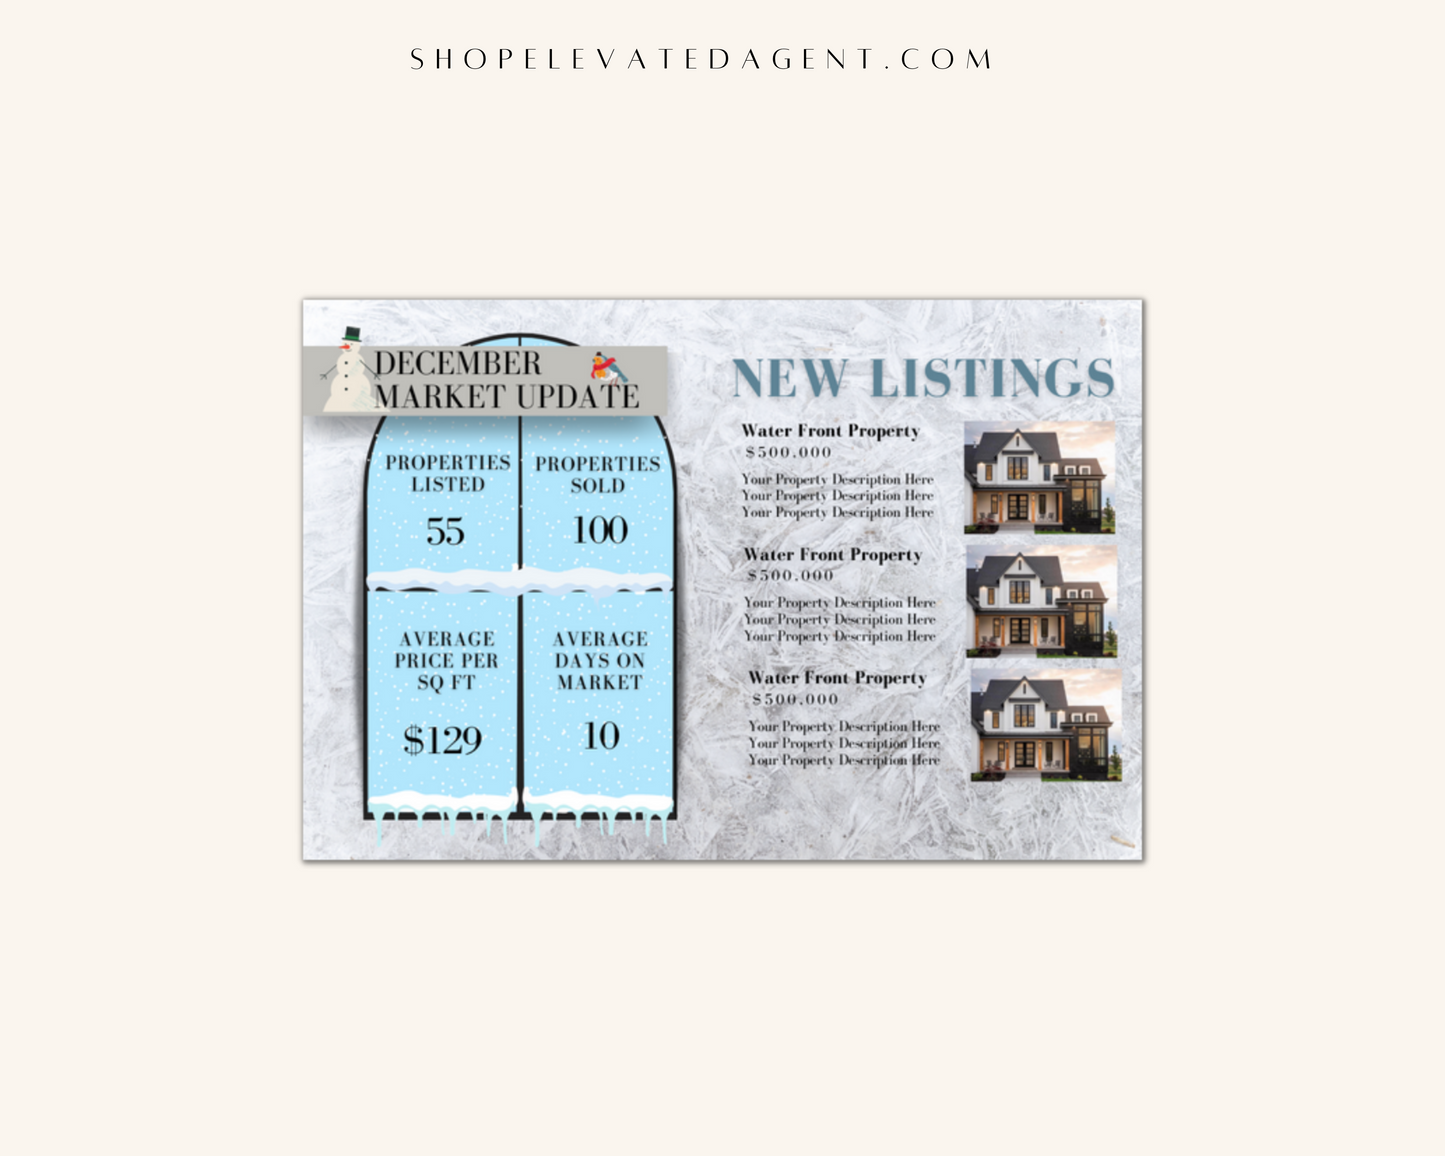 January Newsletter Template for Email Real Estate Template for Email Newsletter Real Estate Newsletter Template for Realtors Real Estate Email Newsletter Template 